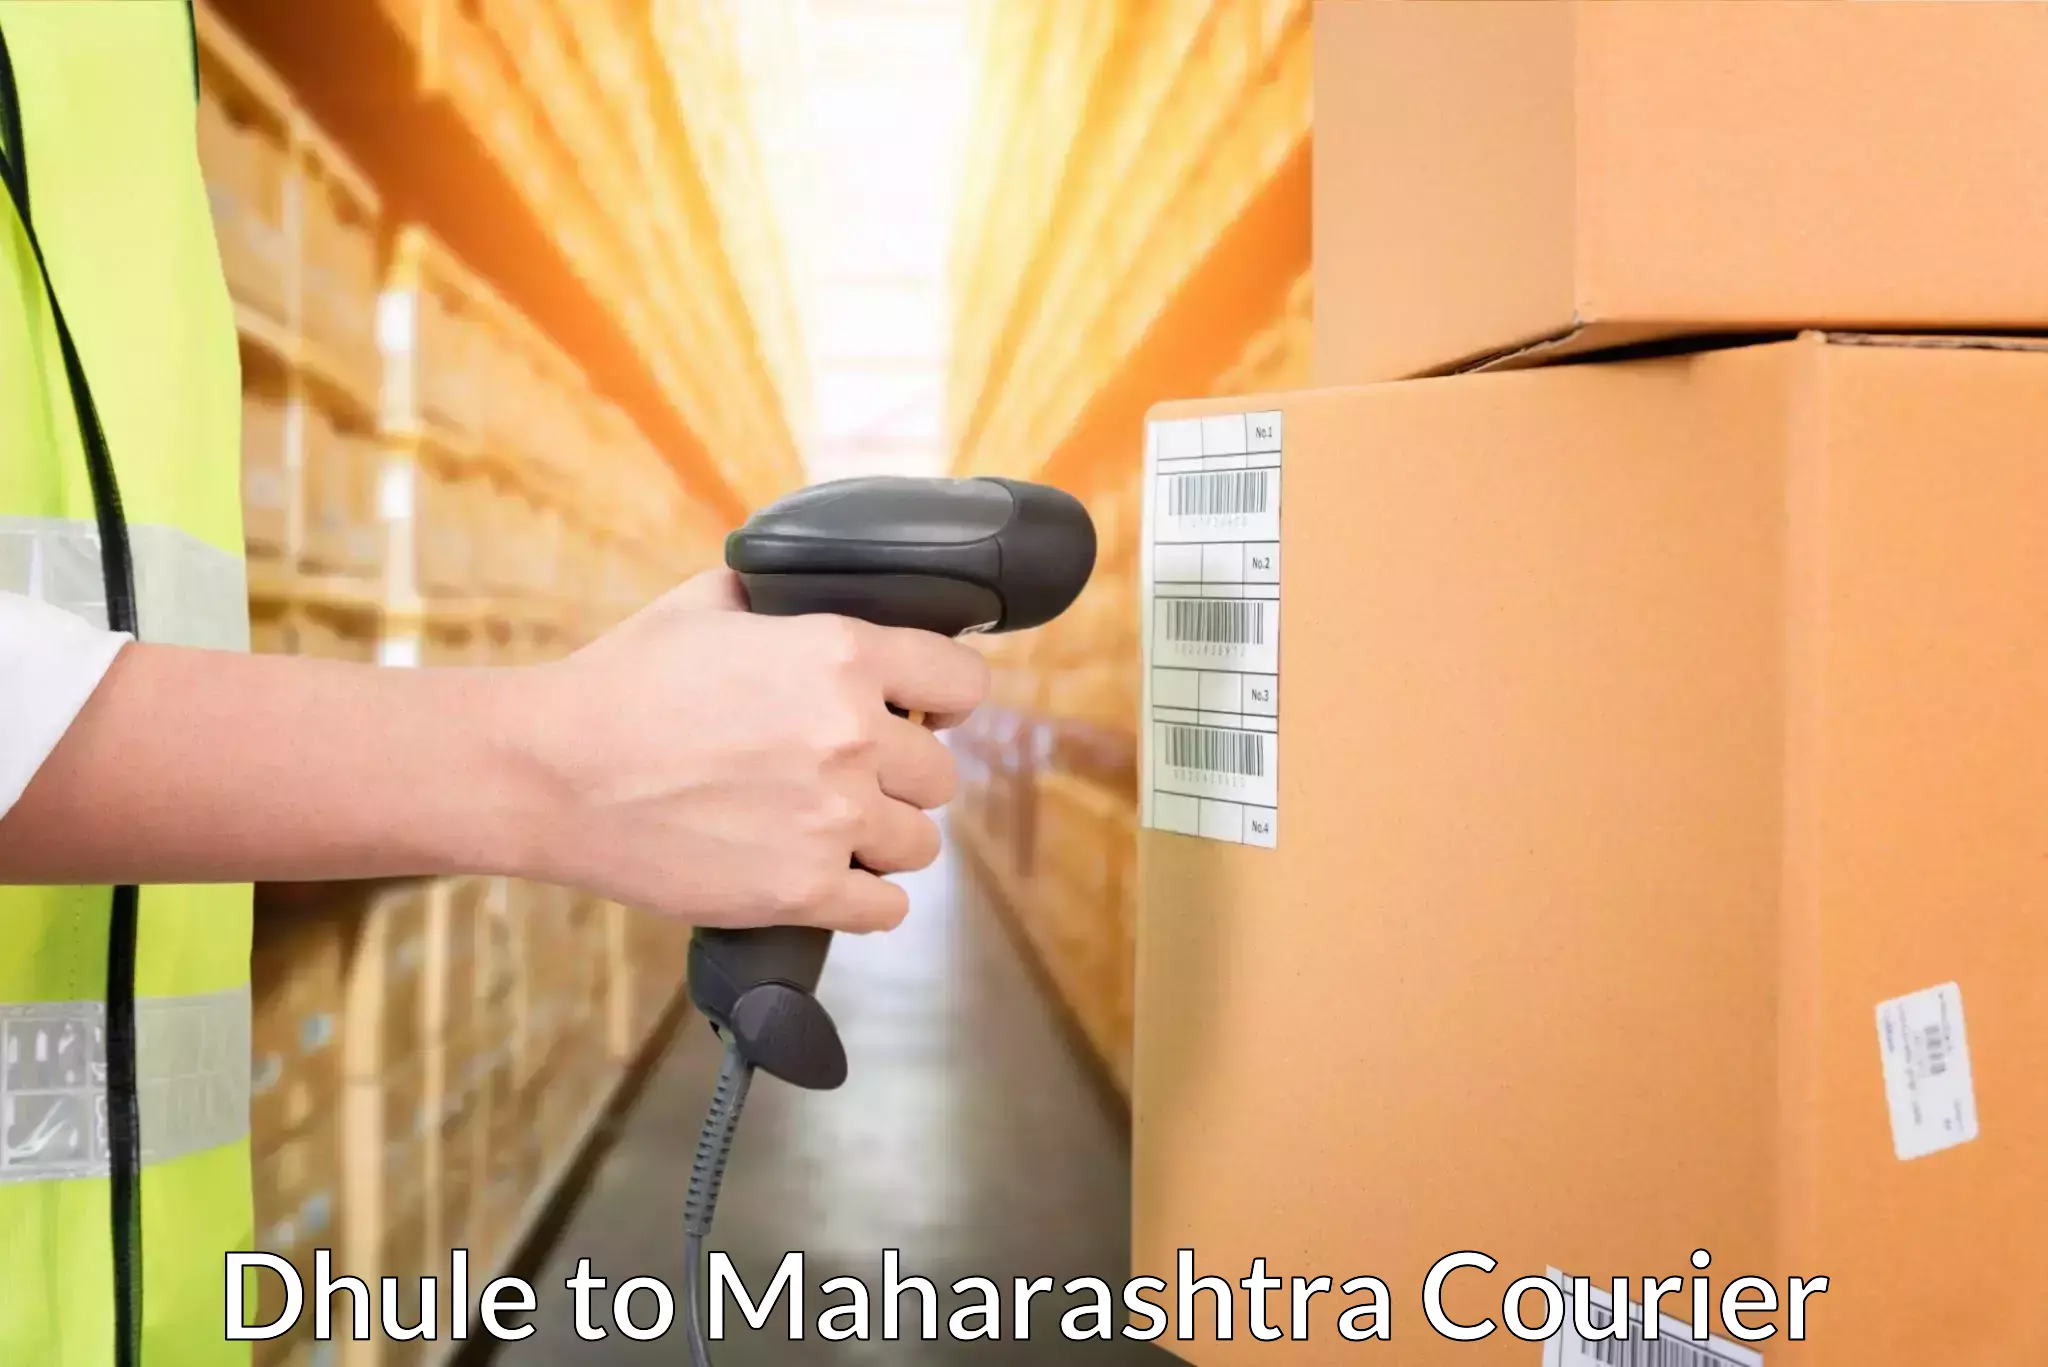 Global shipping solutions Dhule to Pandharpur